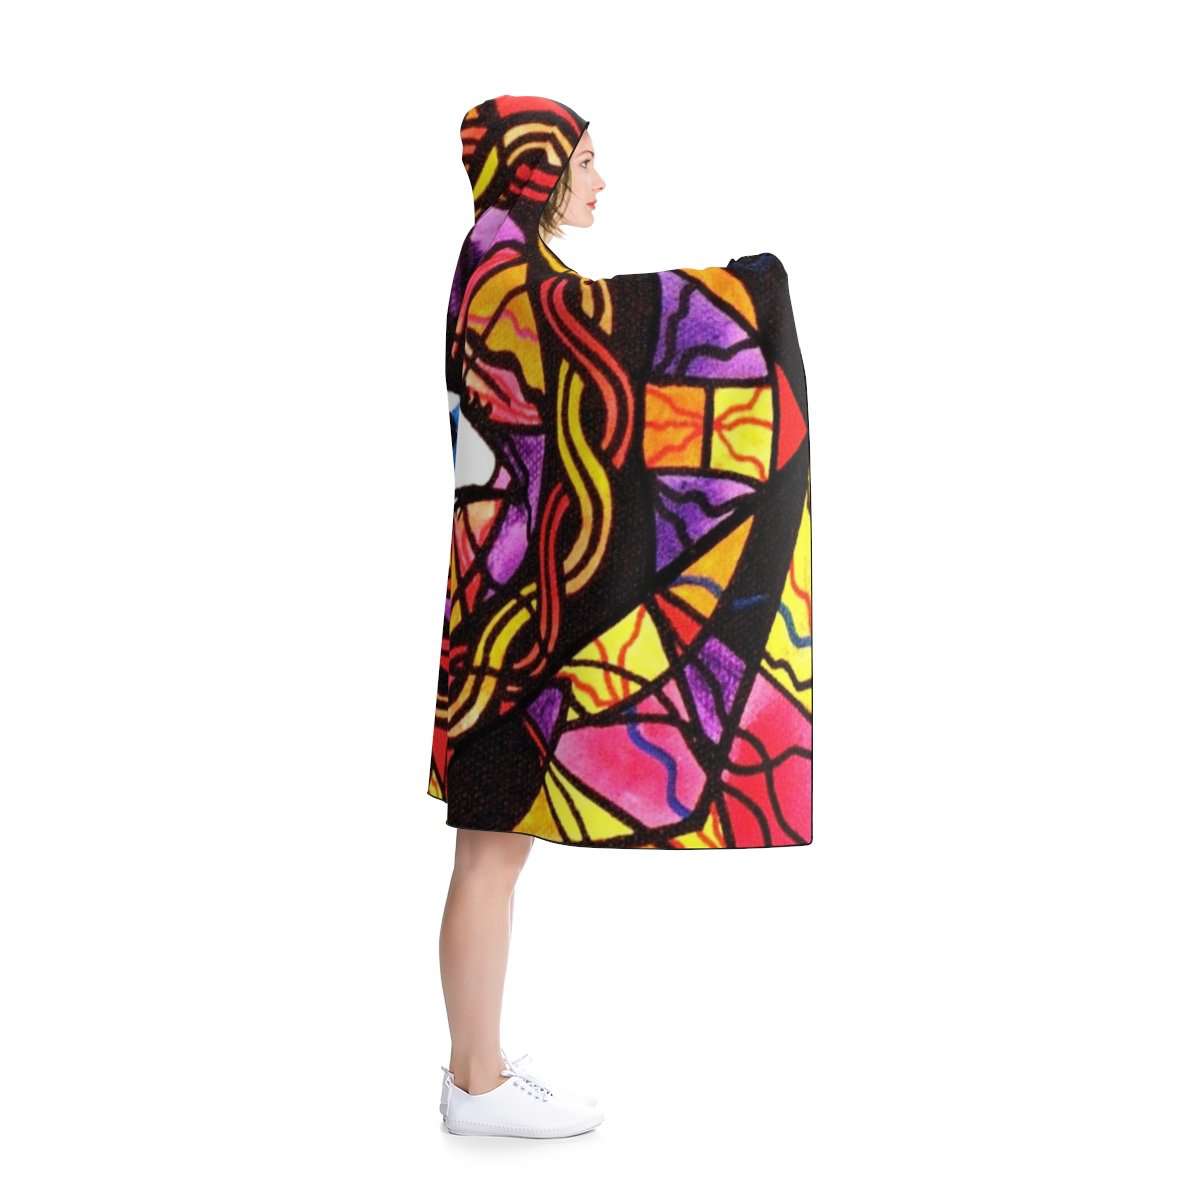 Confident Self Expression - Hooded Blanket